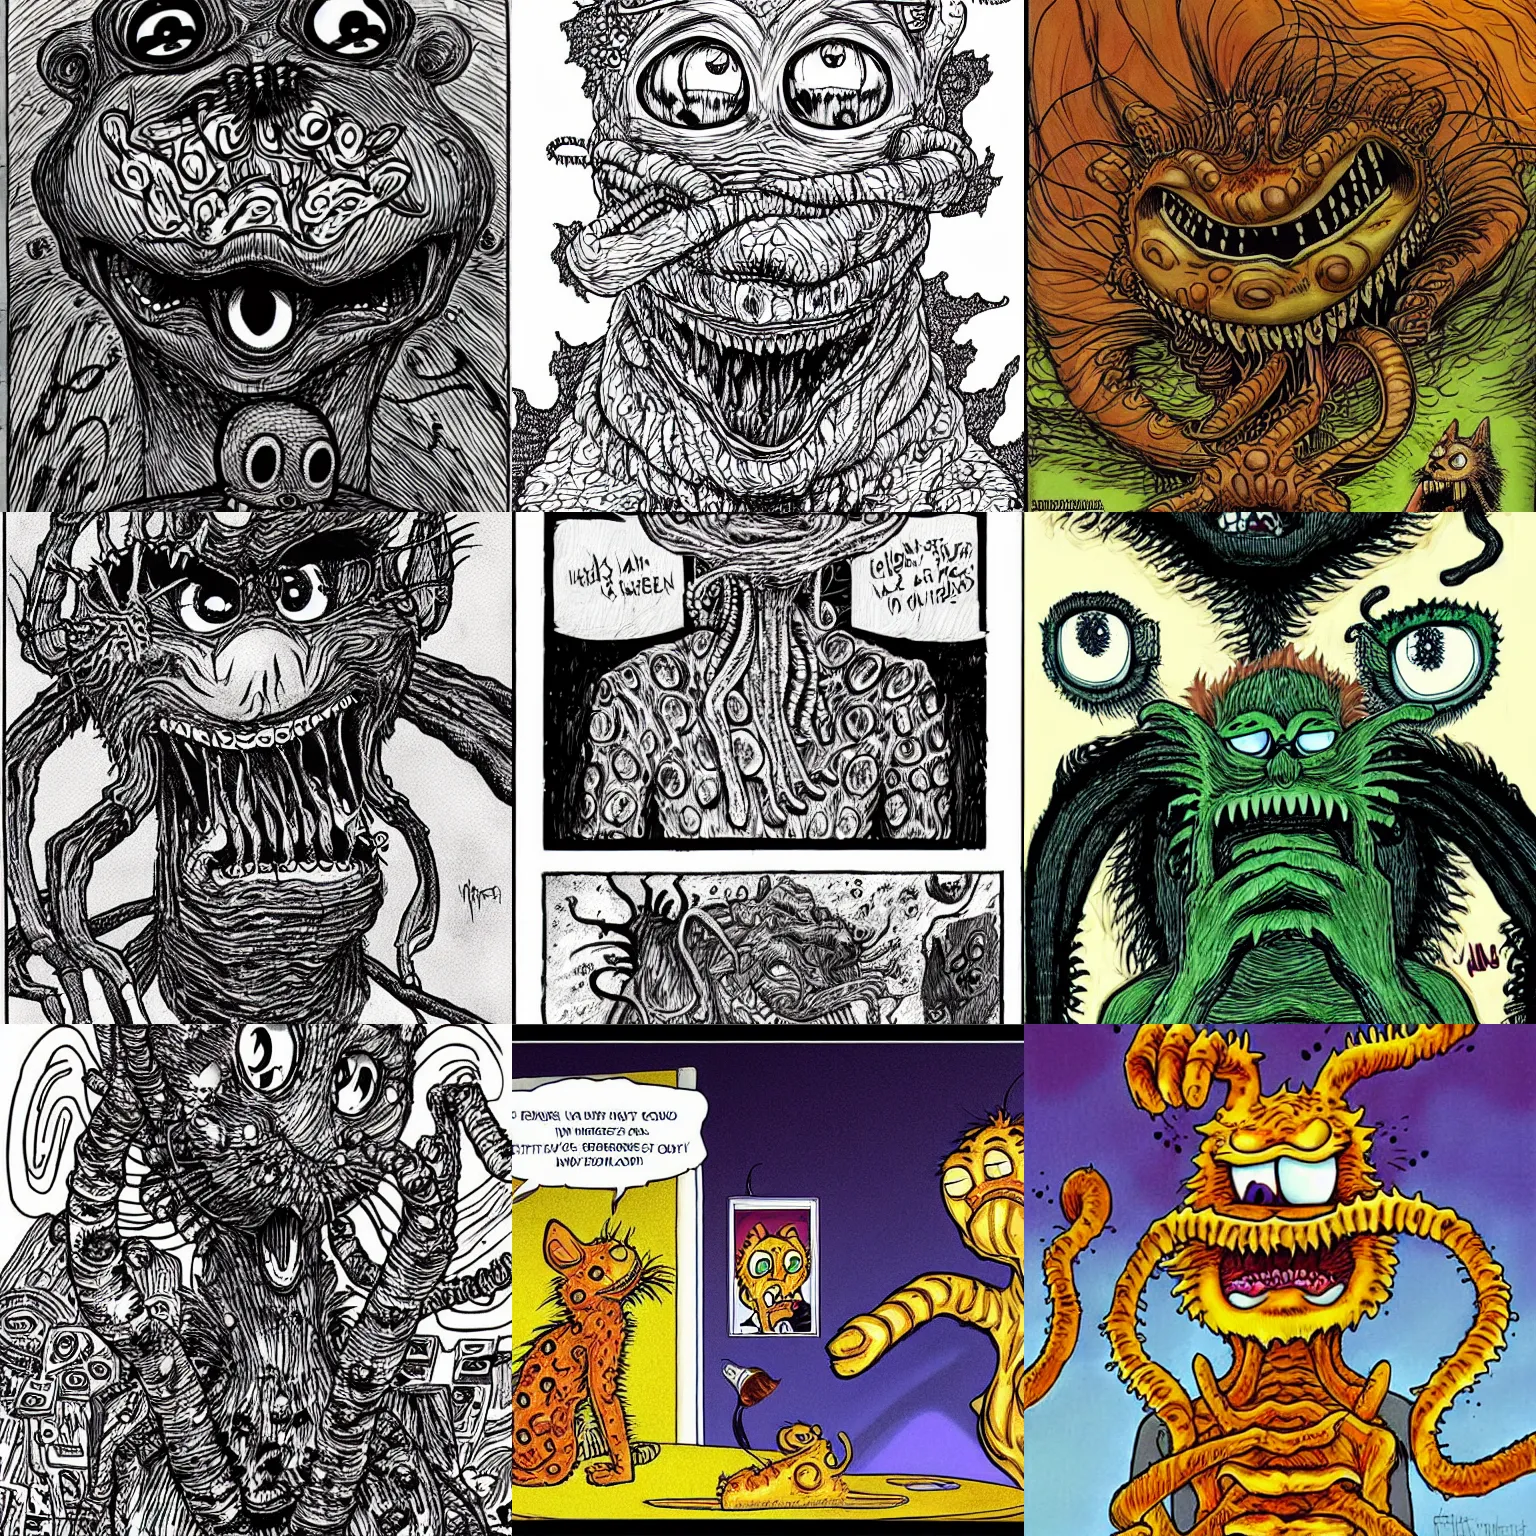 Prompt: eldritch abomination Garfield, illustrated by Junji Ito